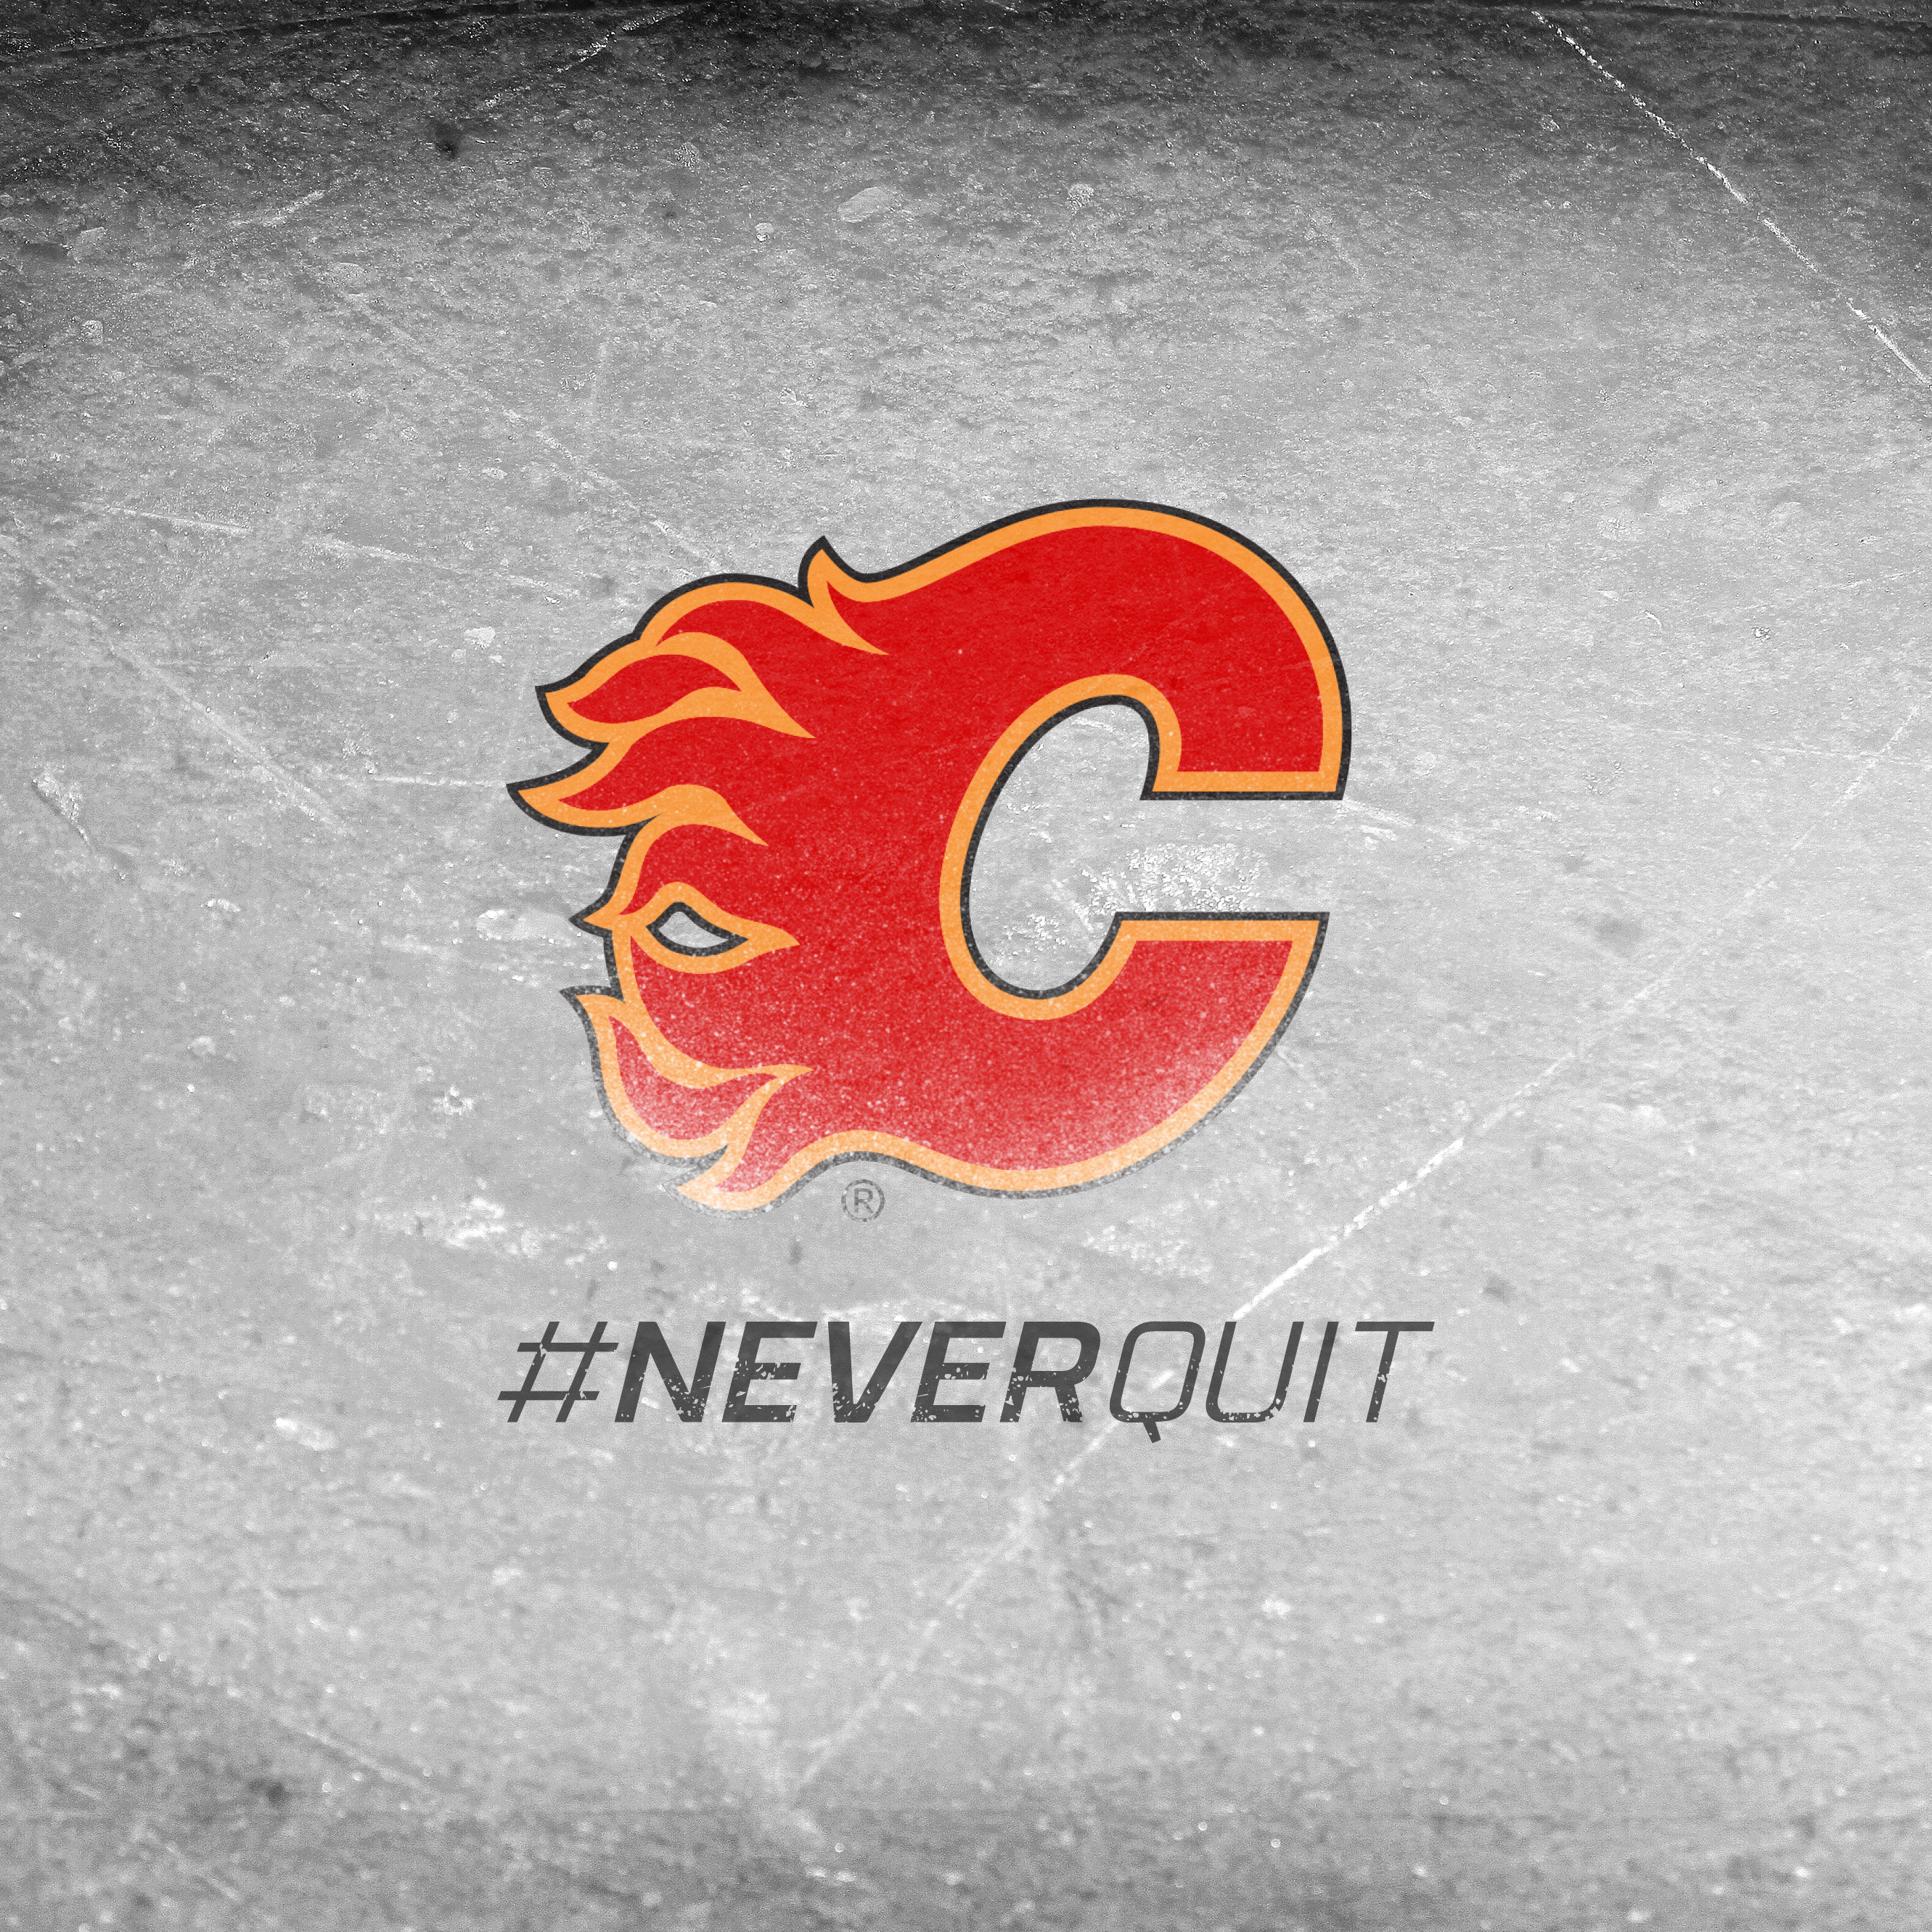 Mobile Calgary Flames Wallpaper Full HD Pictures